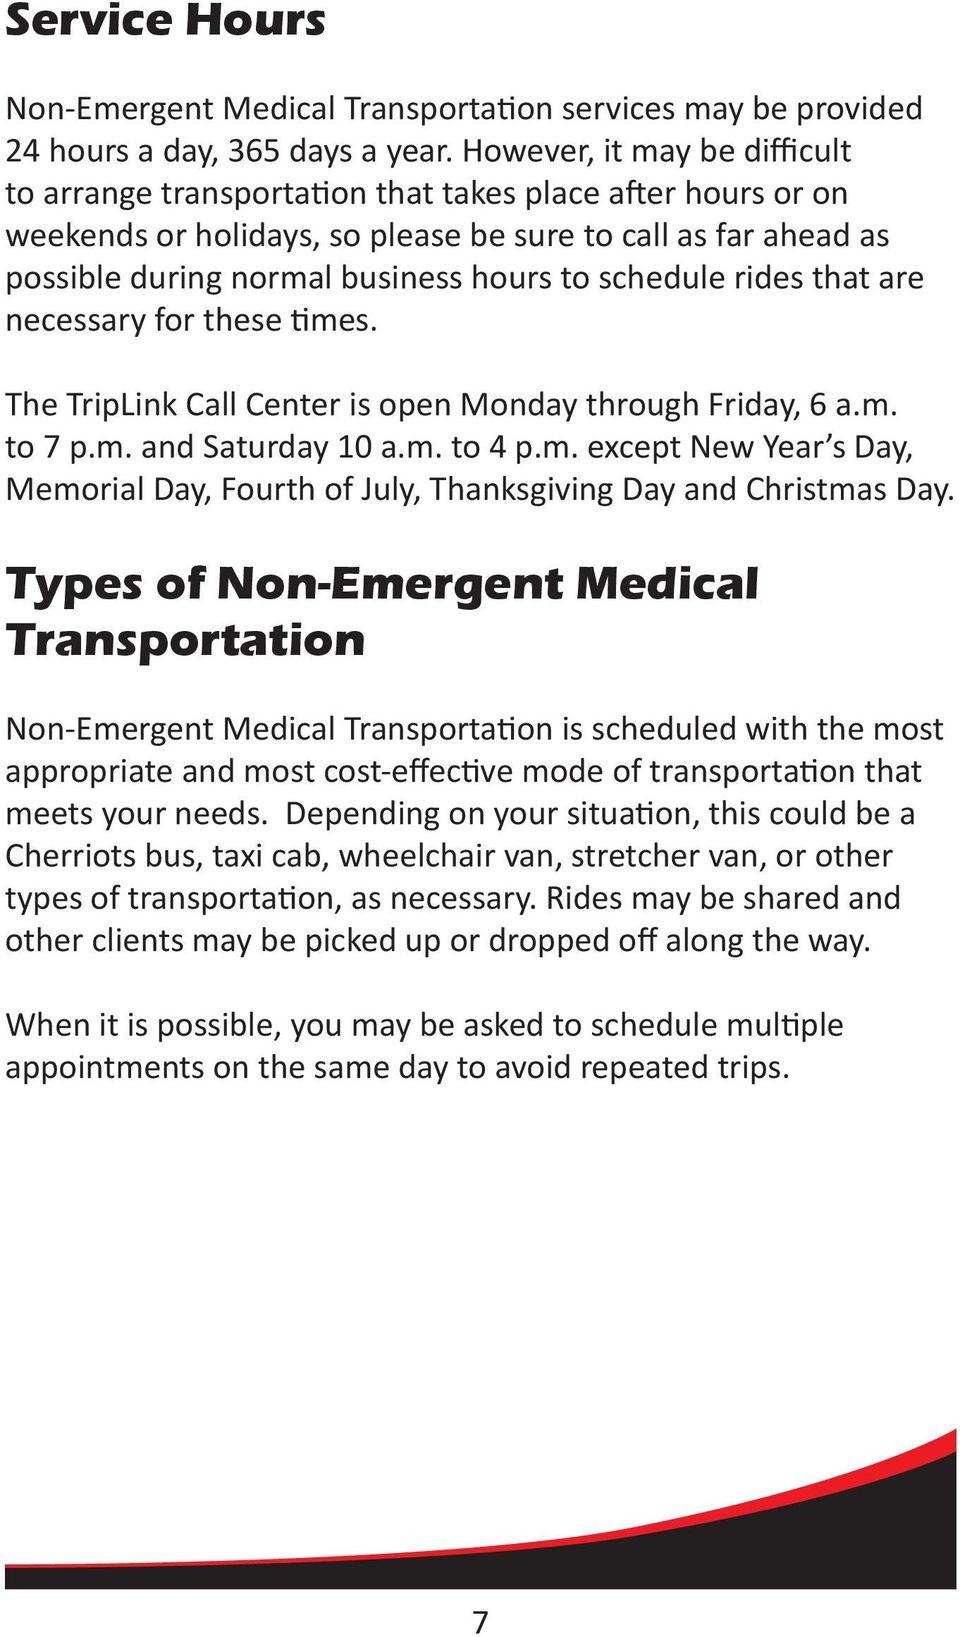 schedule rides that are necessary for these times. The TripLink Call Center is open Monday through Friday, 6 a.m. to 7 p.m. and Saturday 10 a.m. to 4 p.m. except New Year s Day, Memorial Day, Fourth of July, Thanksgiving Day and Christmas Day.